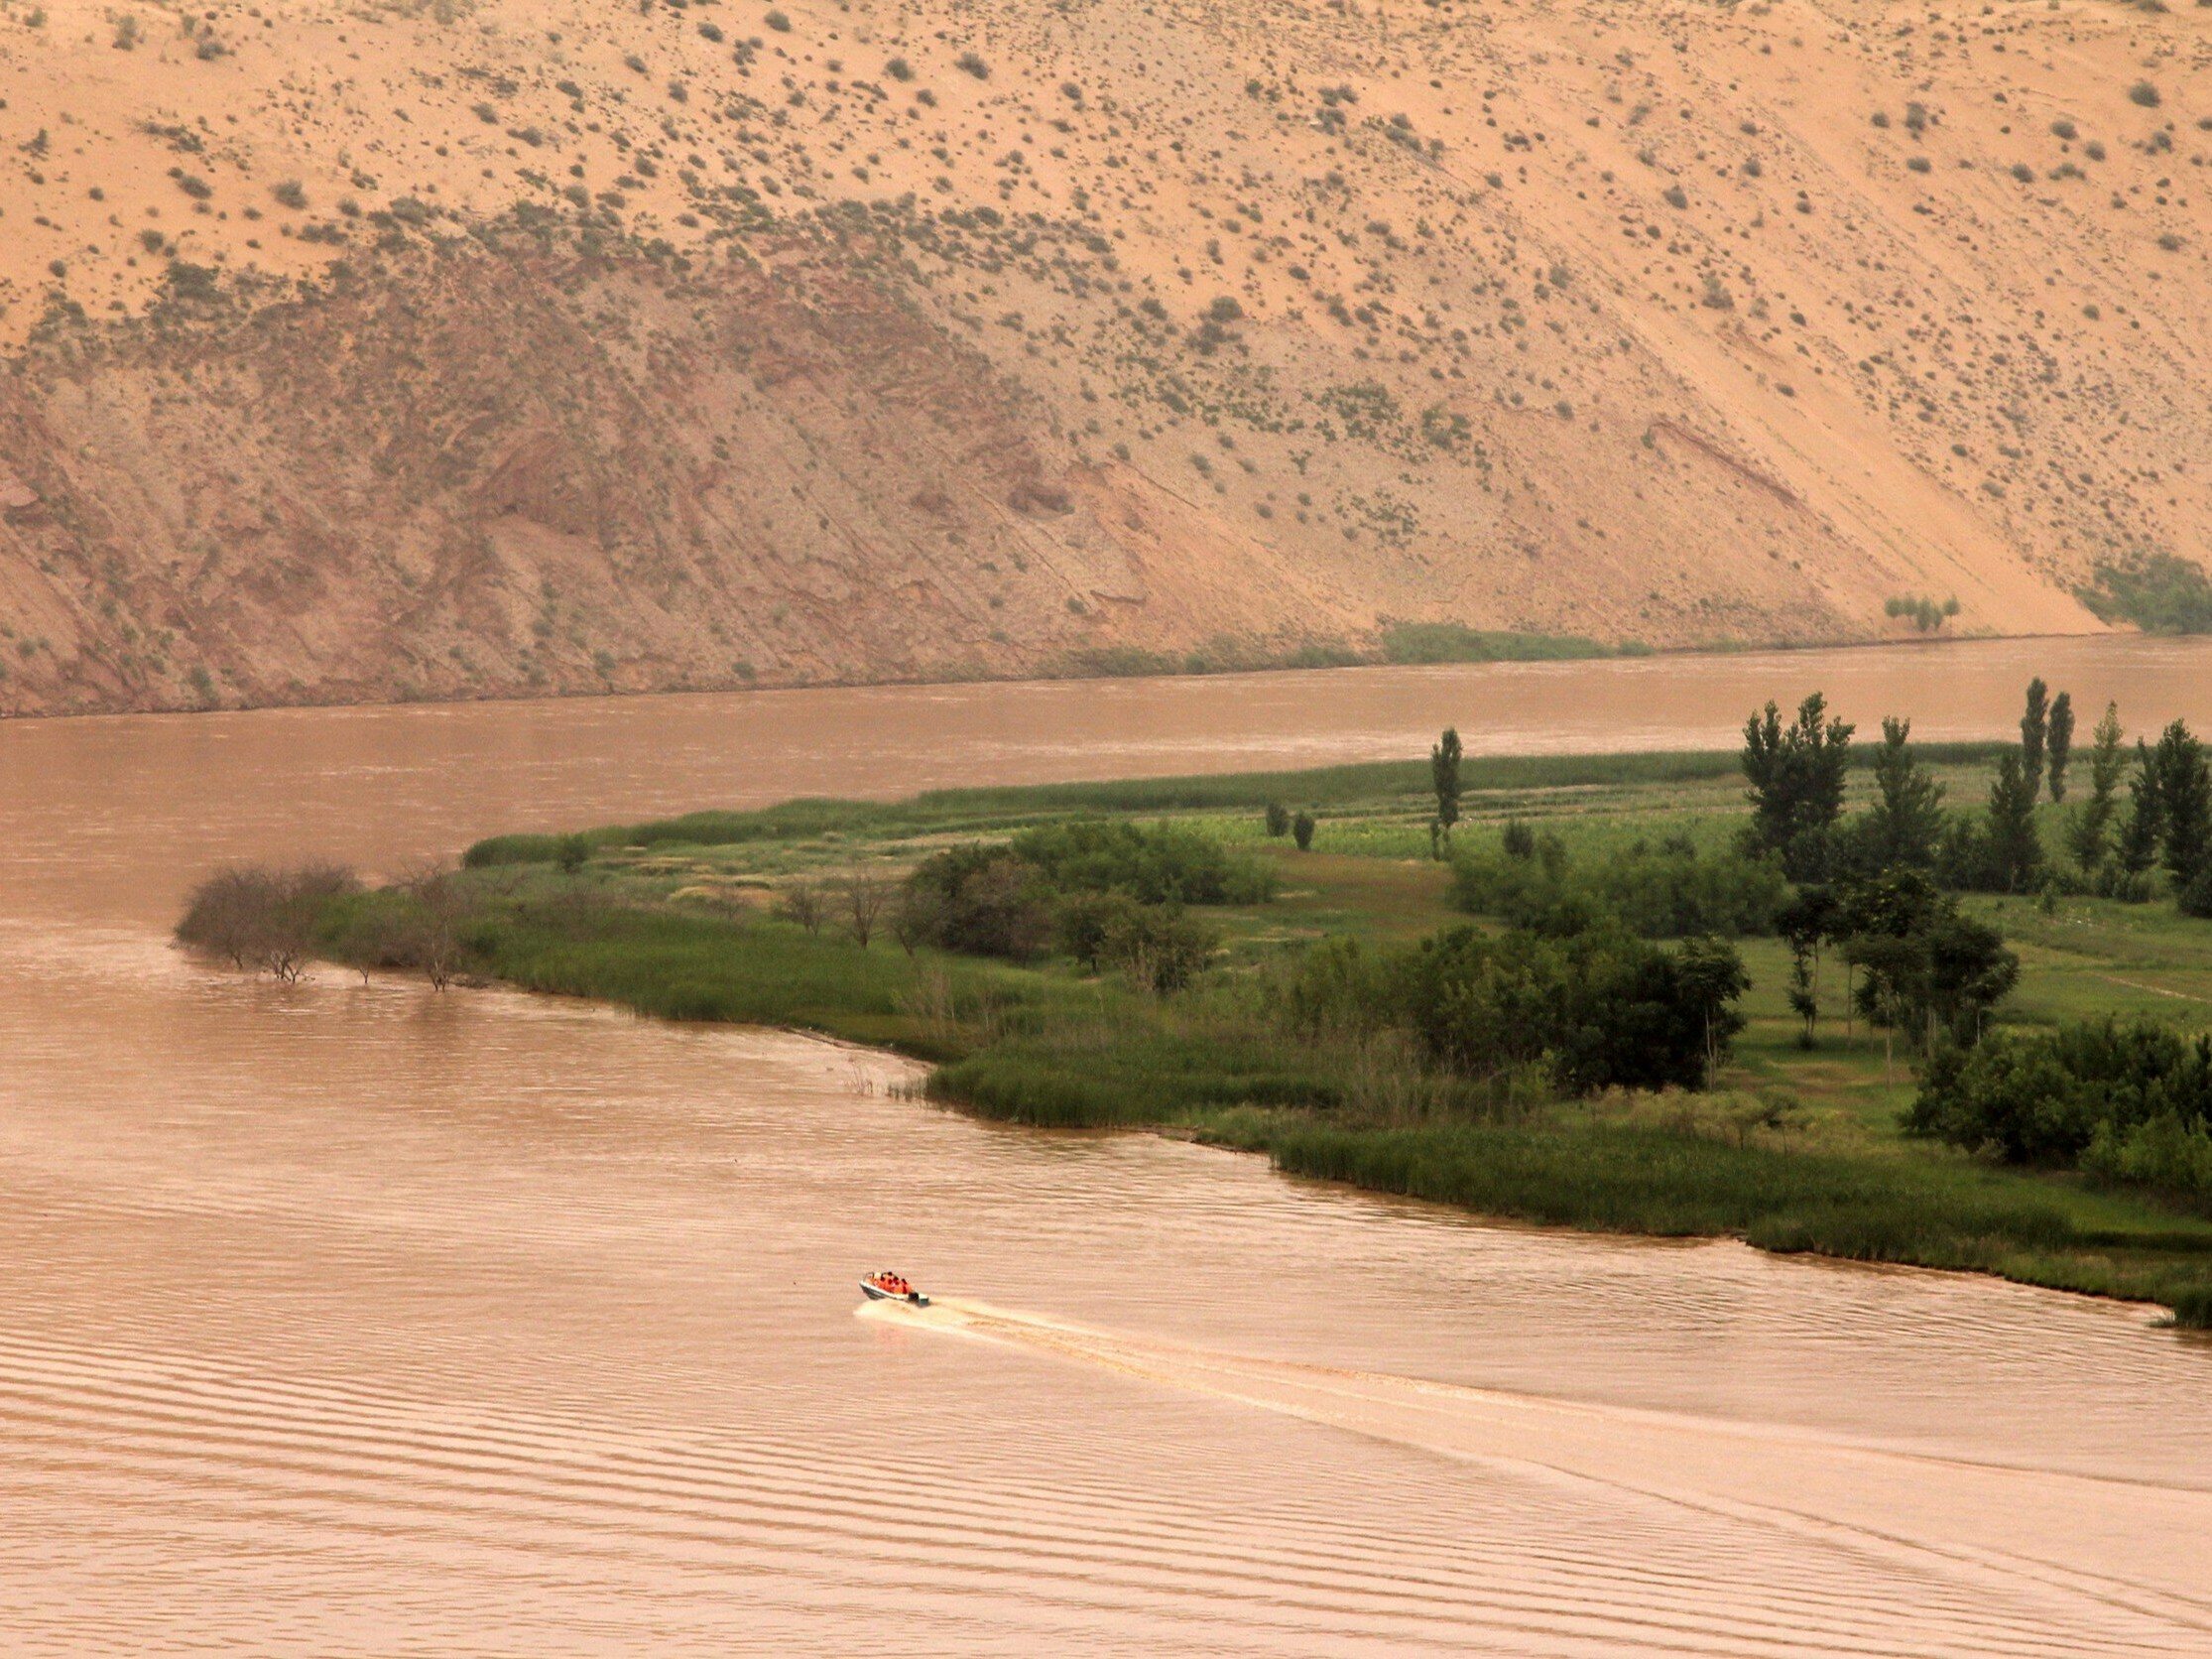 This river killed 4 million people.  It is considered the most dangerous in the world